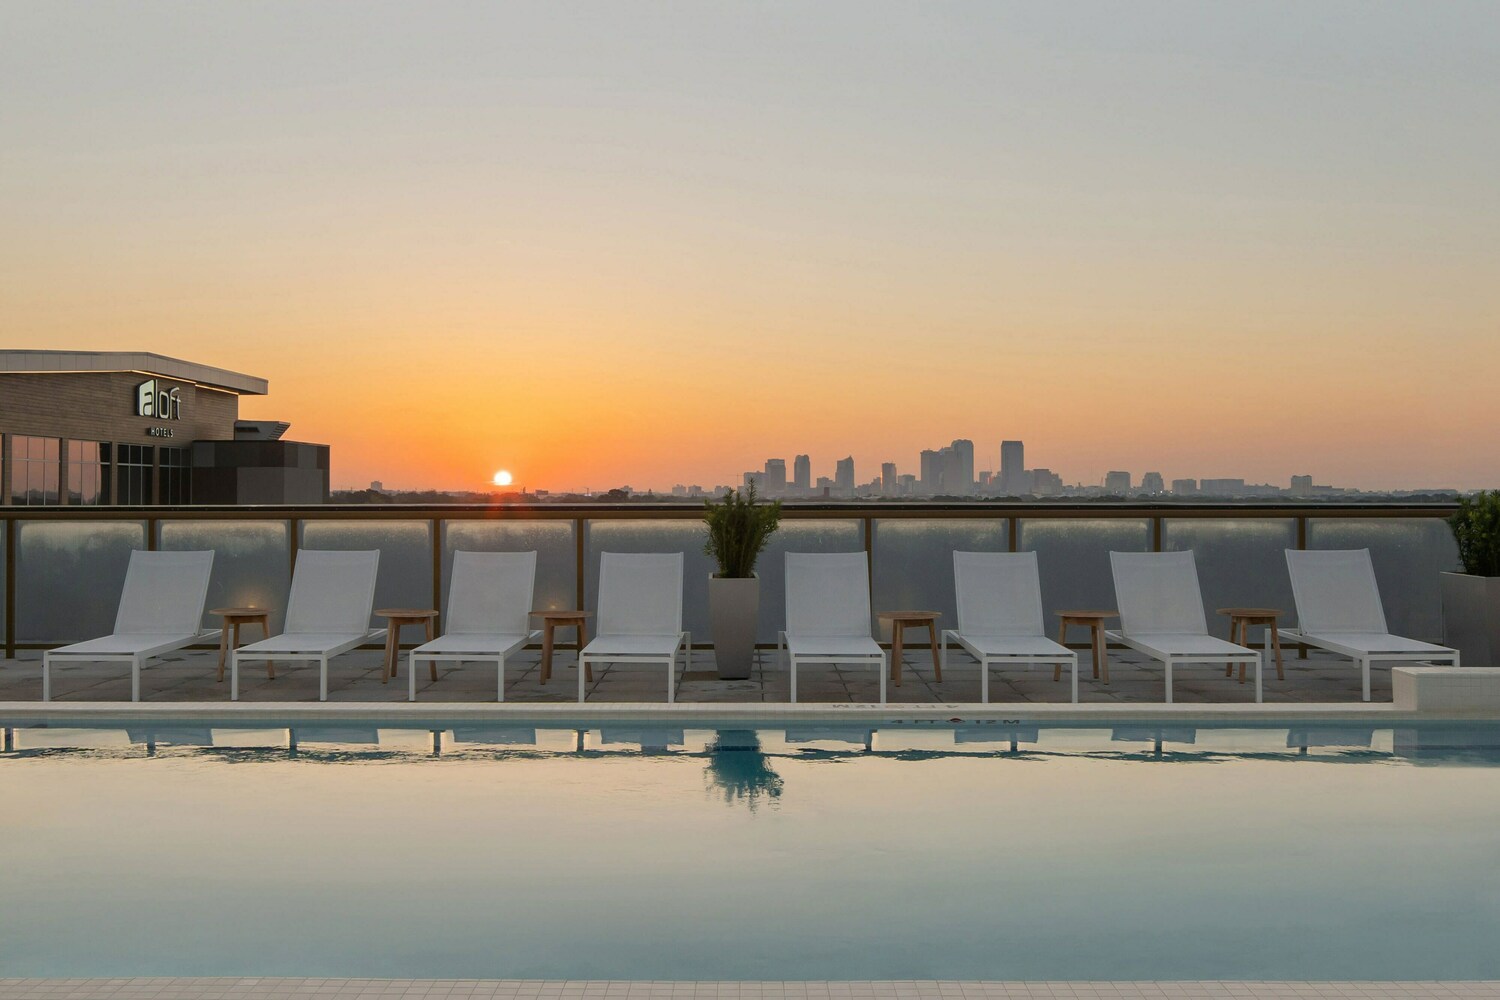 Admire the sunset looking out at beautiful downtown Tampa from a chaise lounge in our rooftop pool